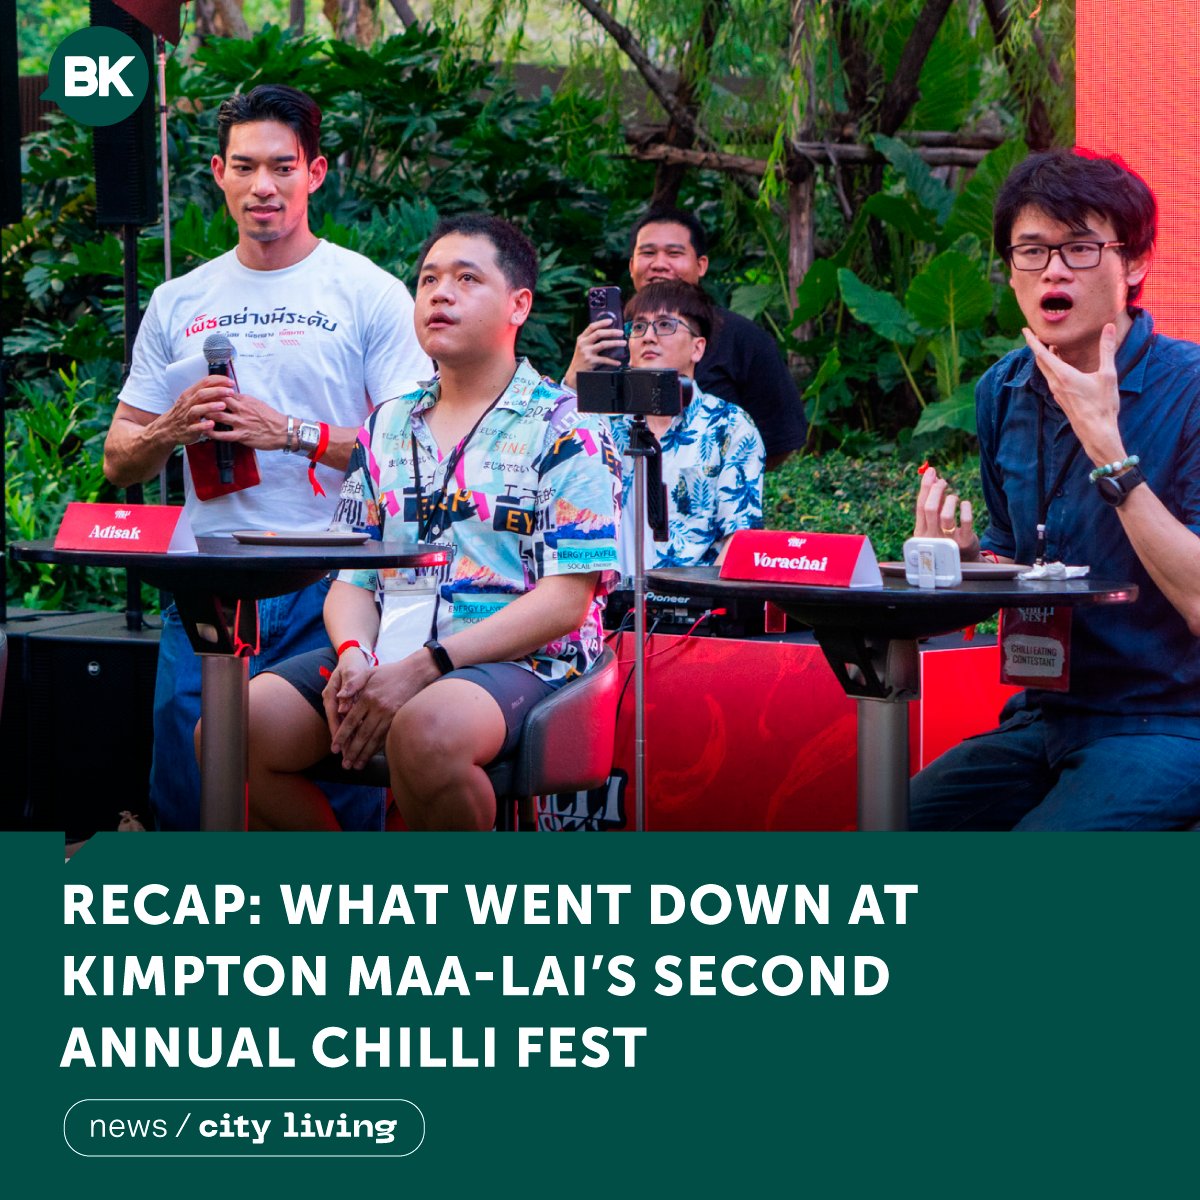 Renowned restos, live music, chili-eating competition, and more. bk.asia-city.com/city-living/ne…